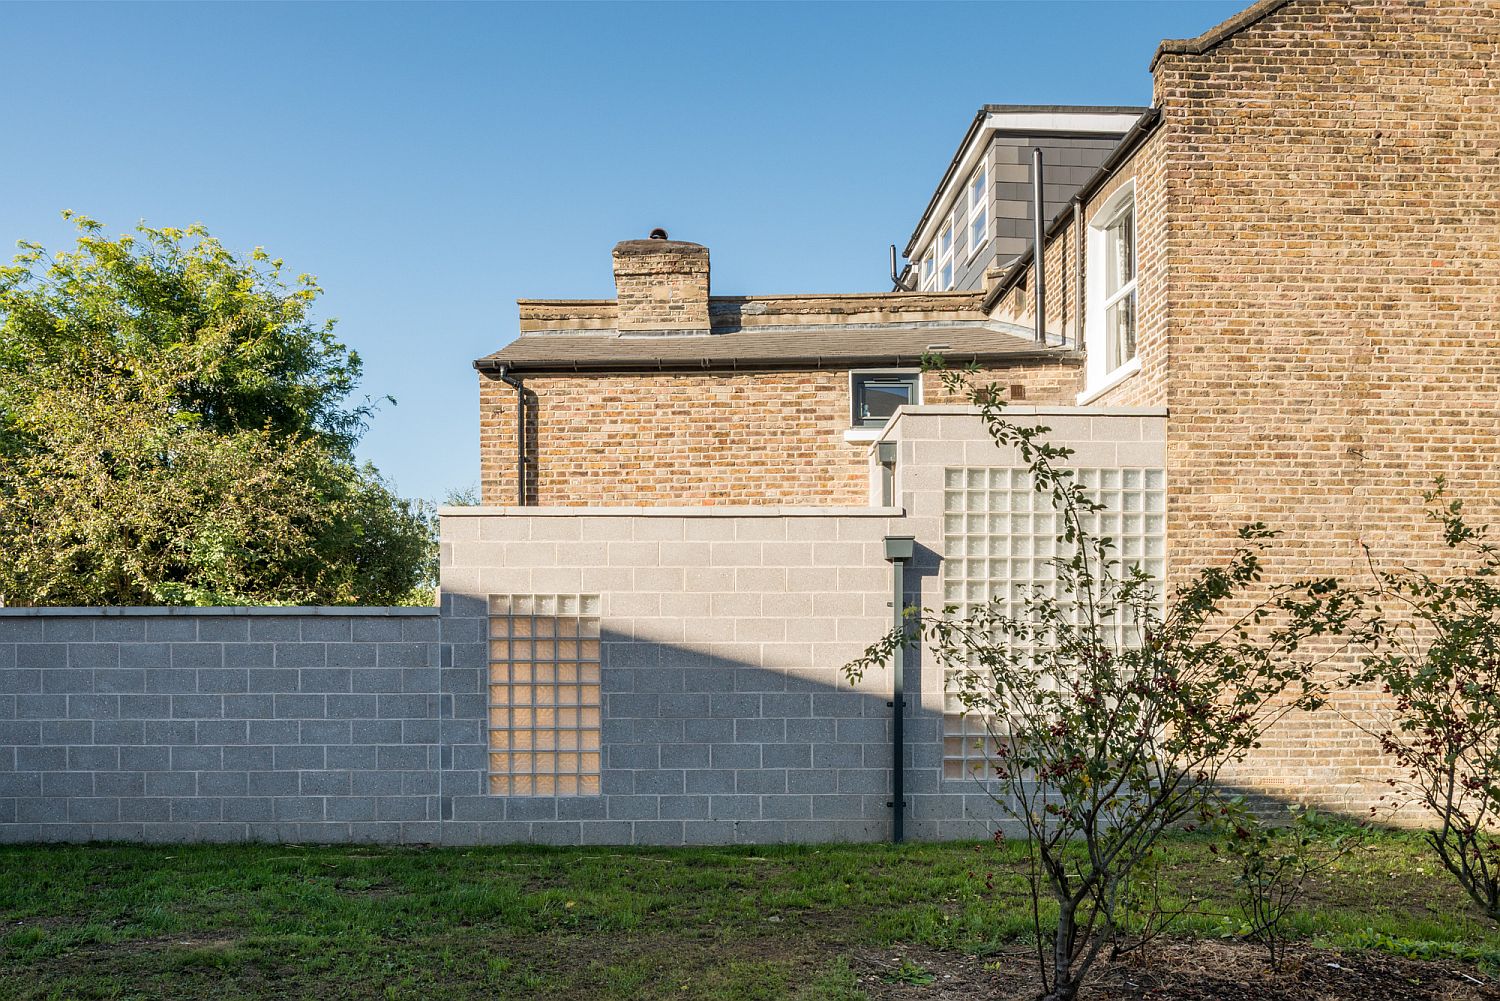 Modern cement block extension to Victorian terrace home in north-east London